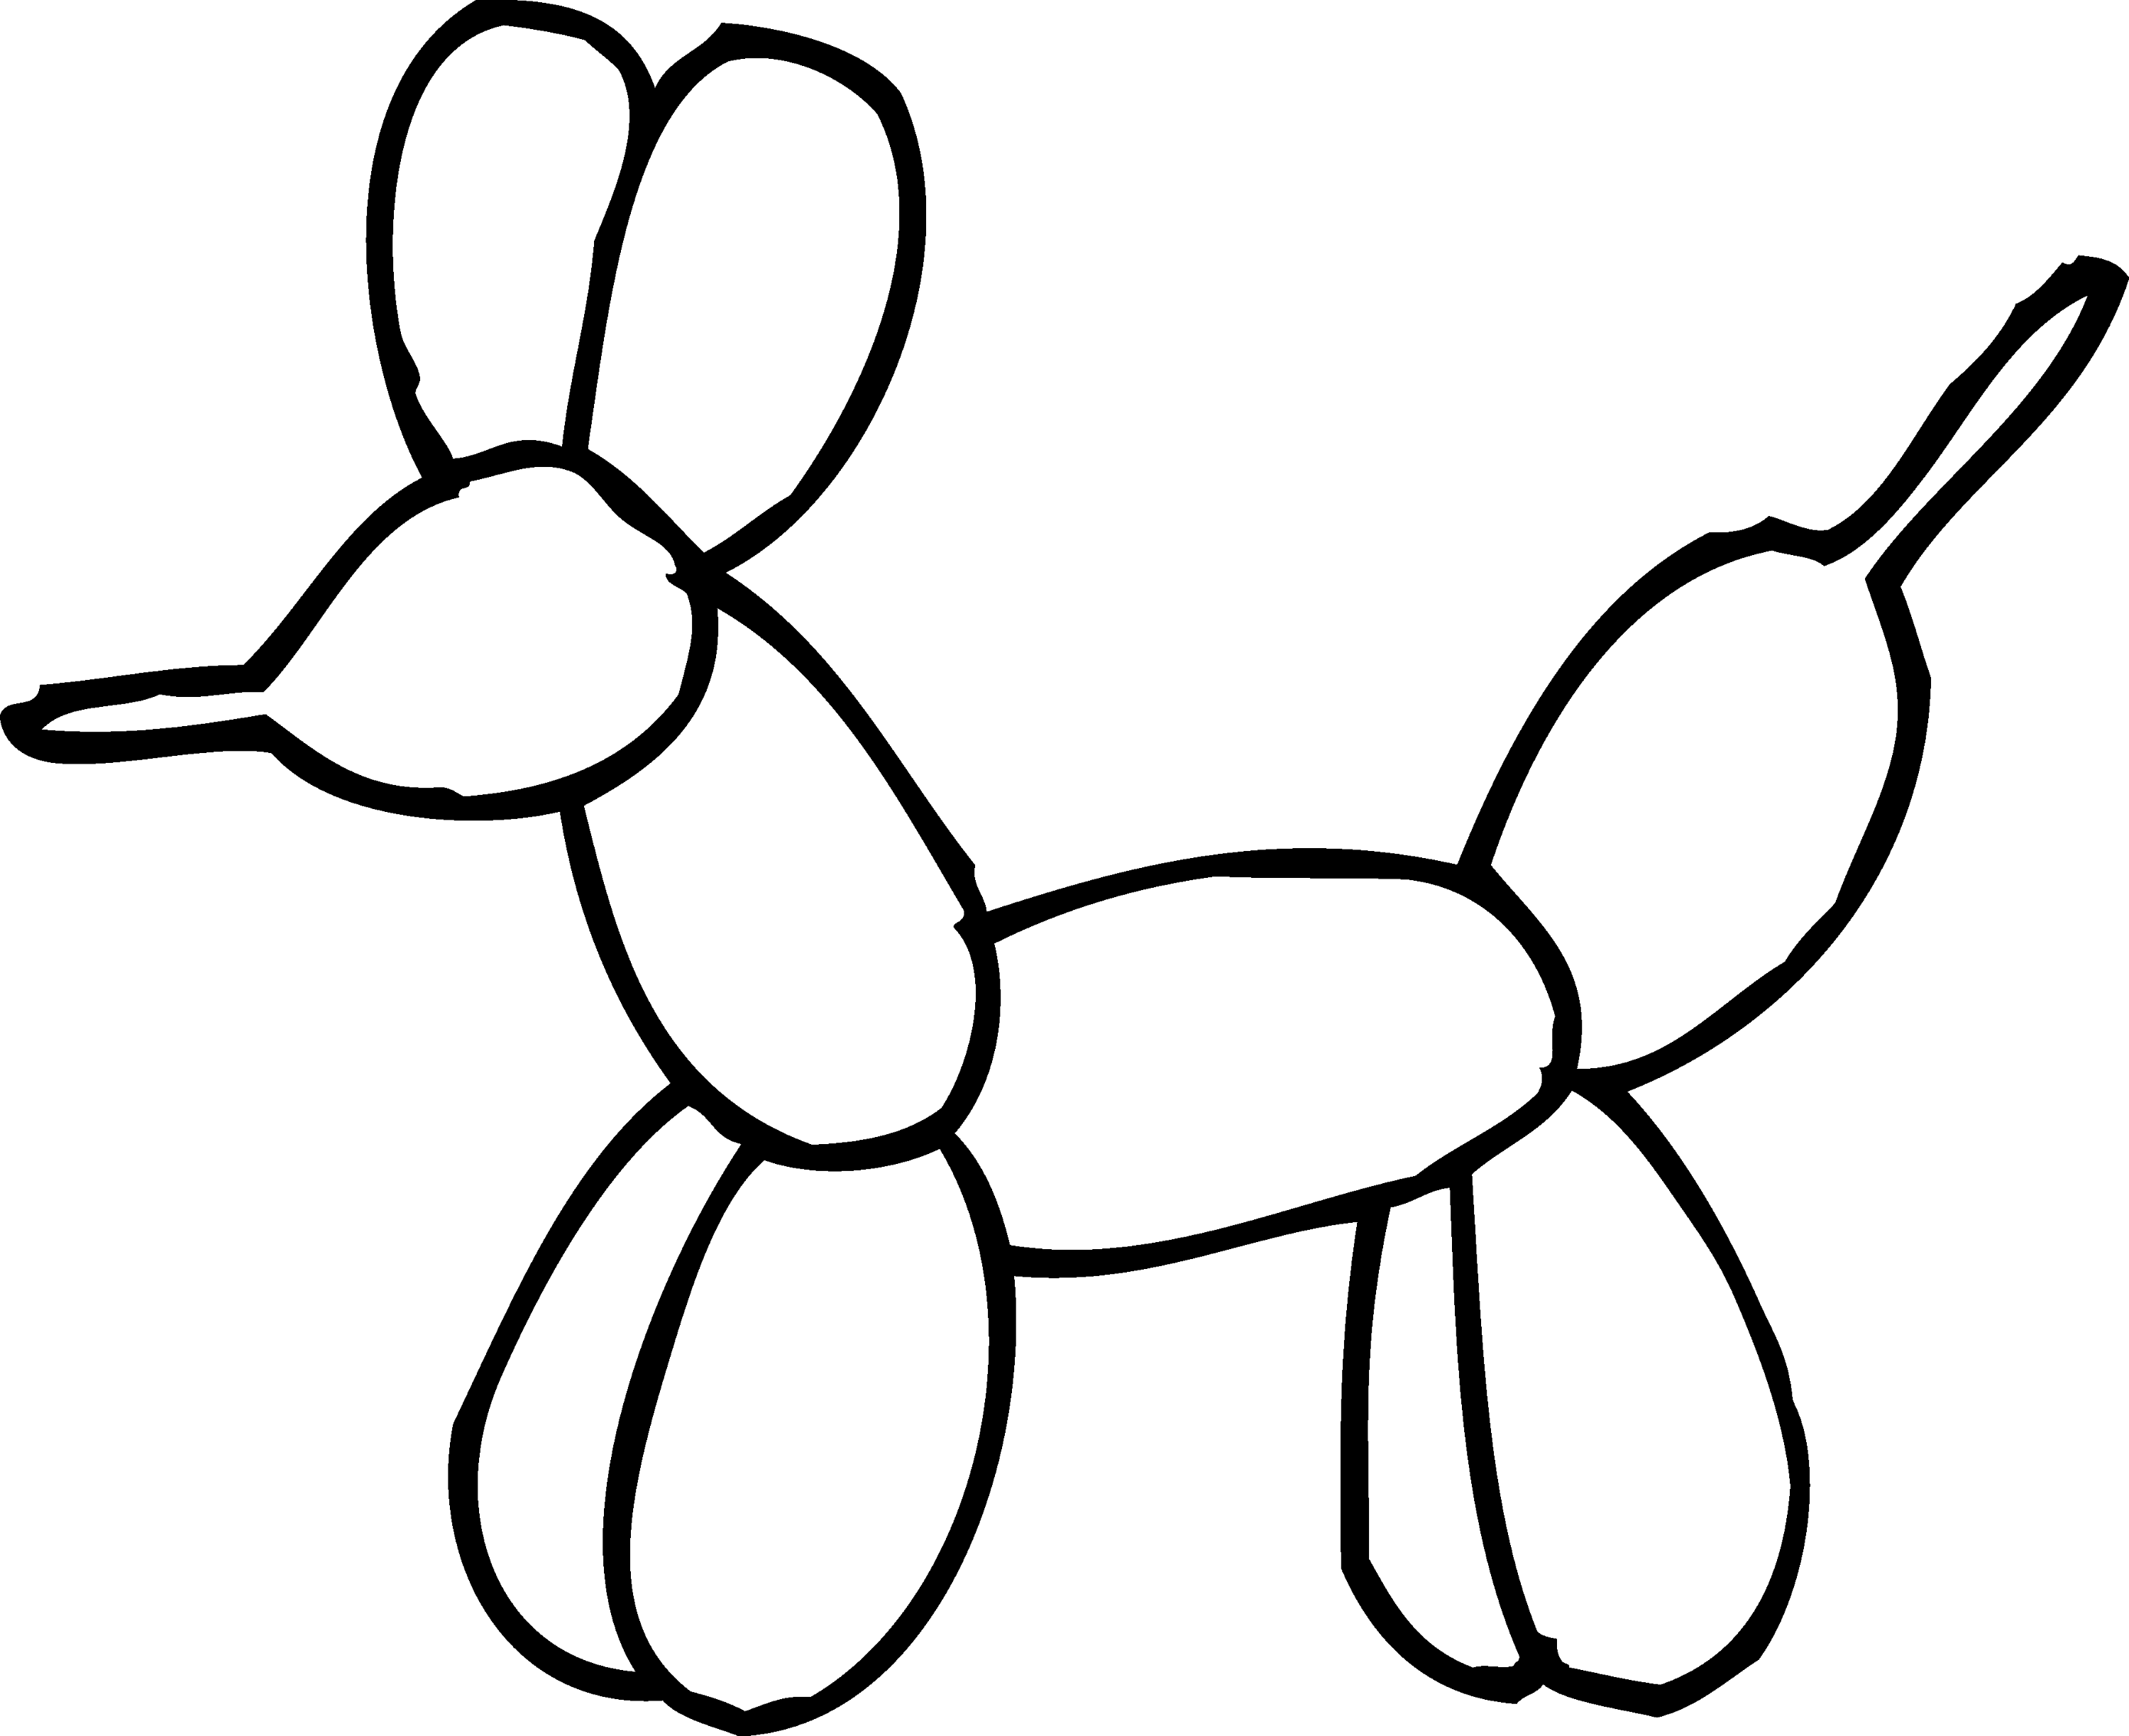 Balloon Animal Coloring Page - Free Clip Art